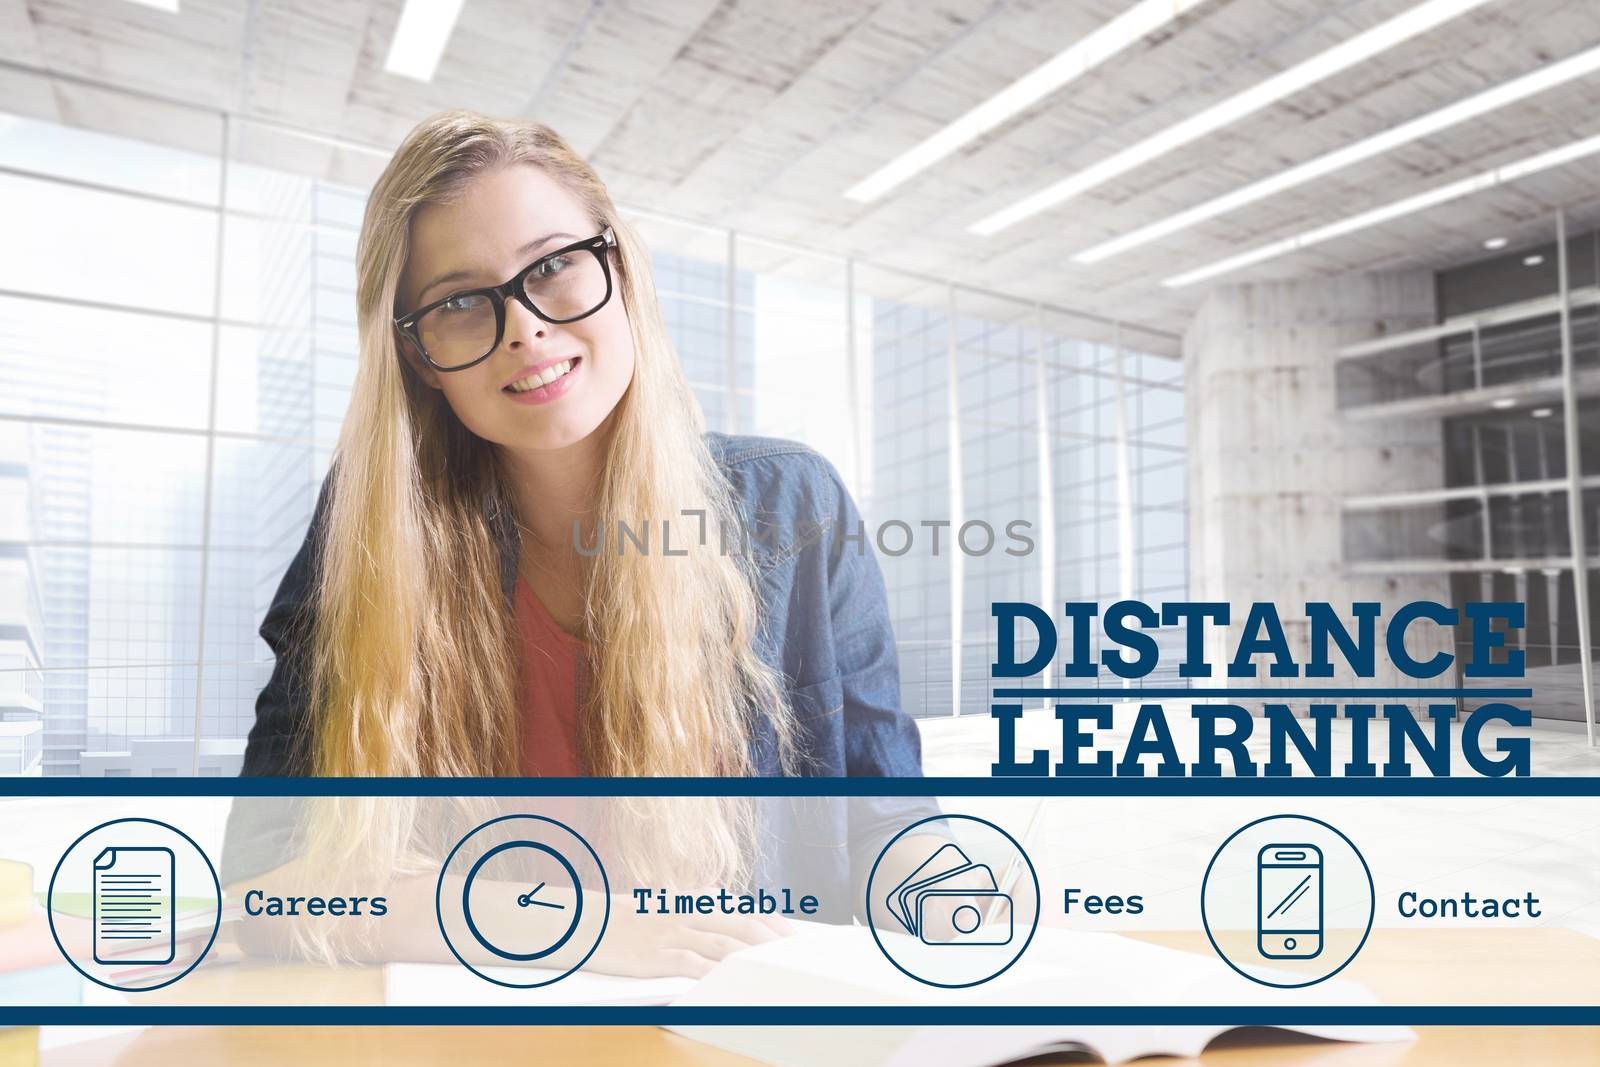 Education and distance learning text and icons and woman sitting by Wavebreakmedia